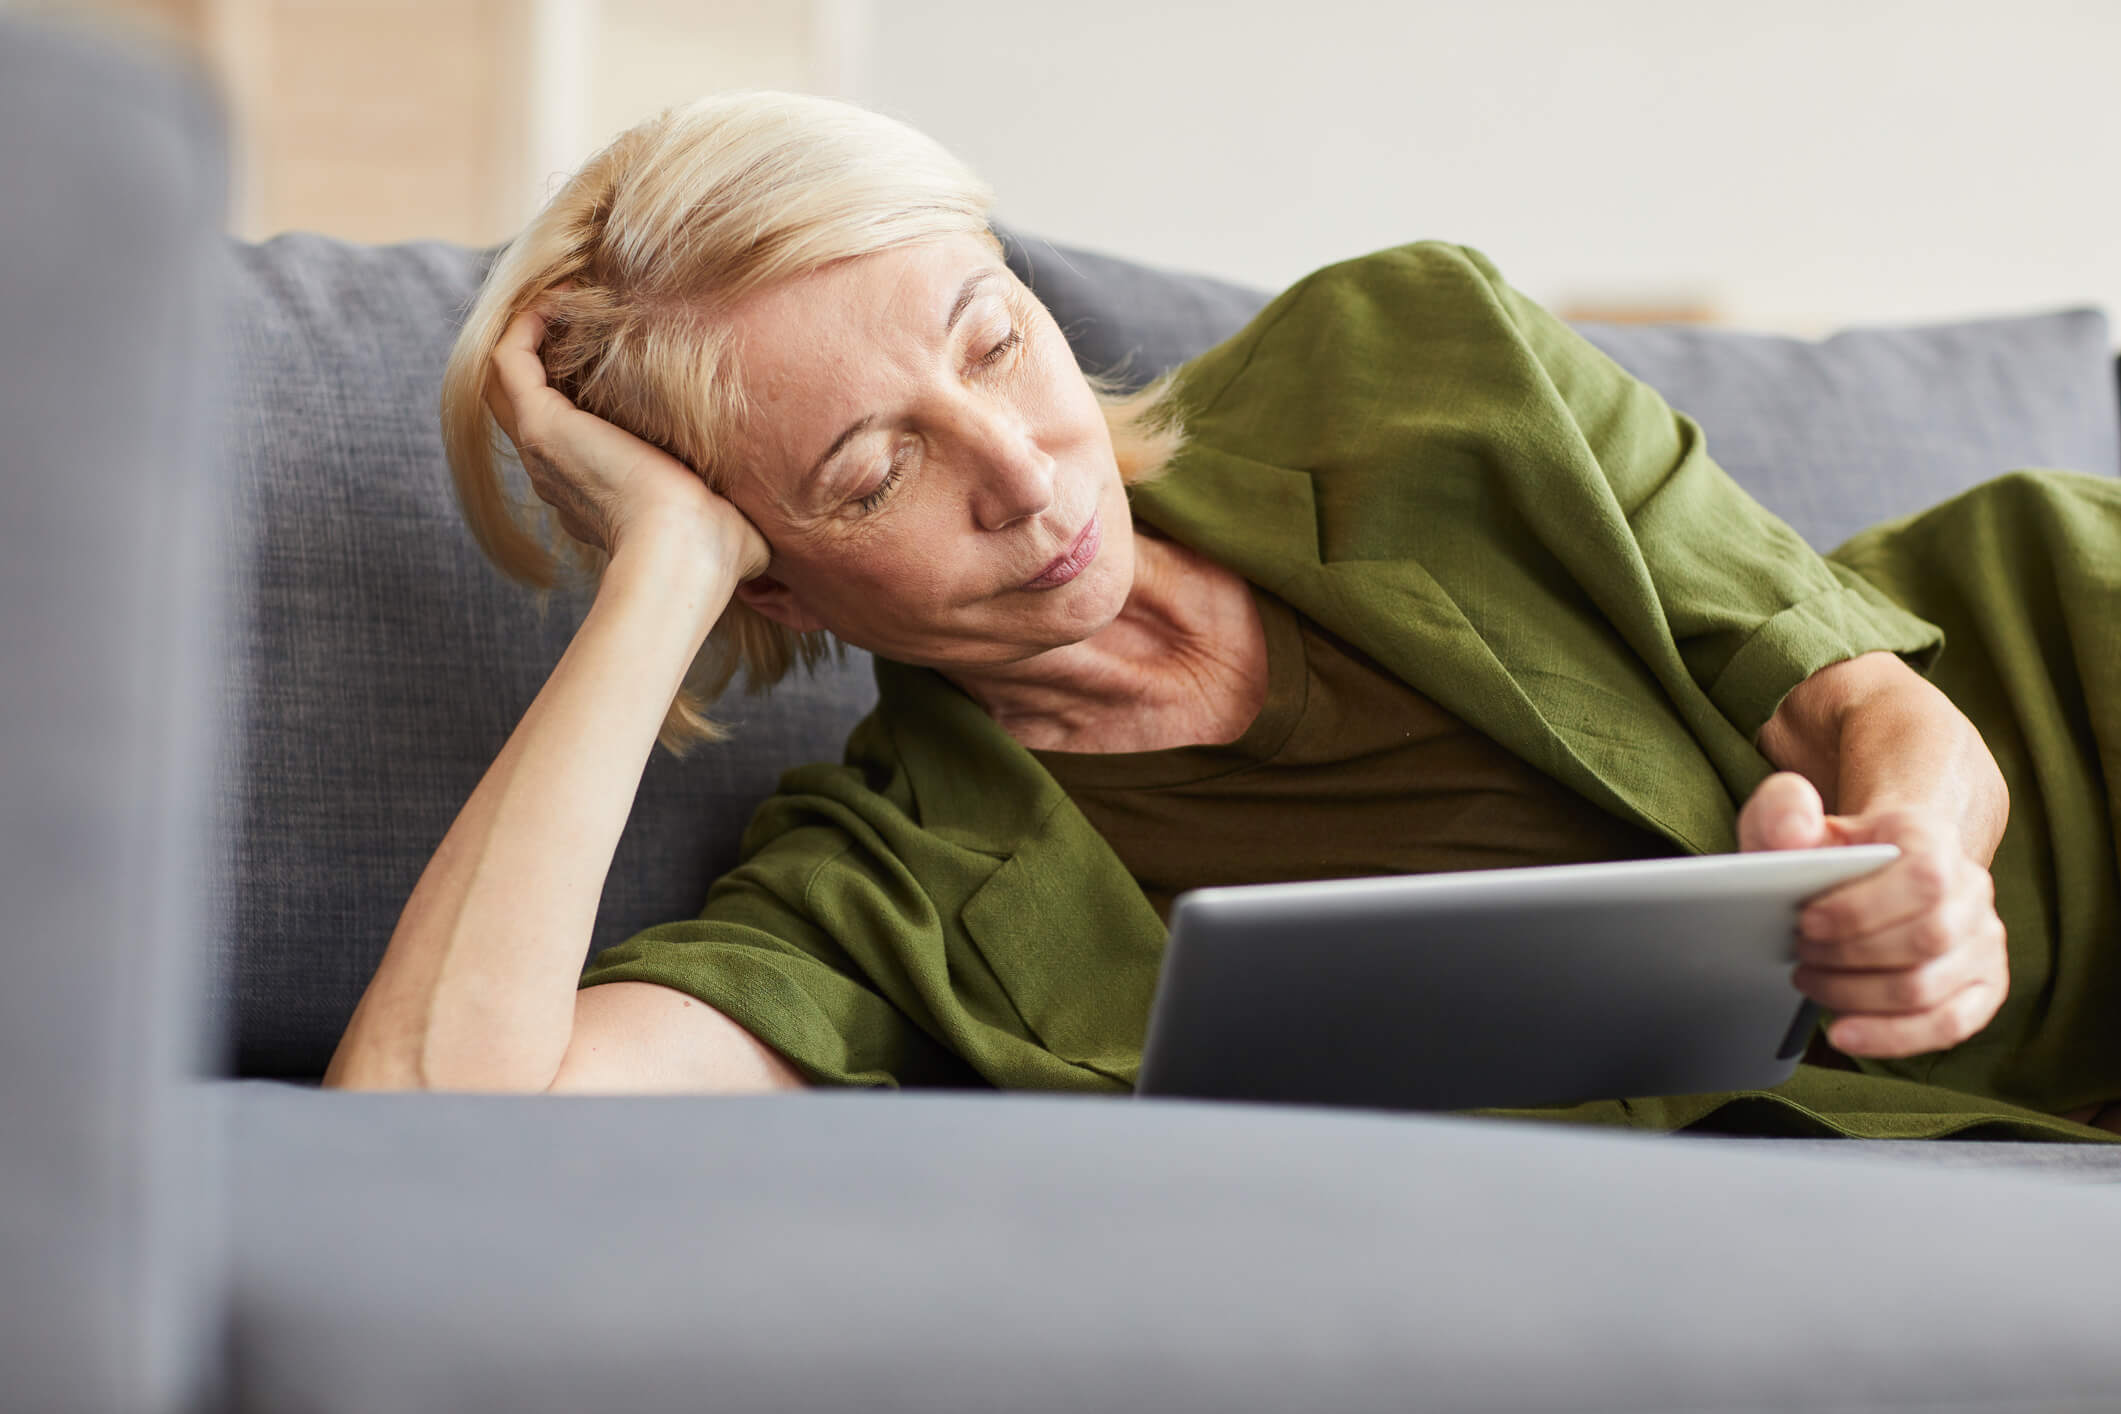 A woman is leaning on her arm on a couch and using a tablet; she has a relaxed expression.